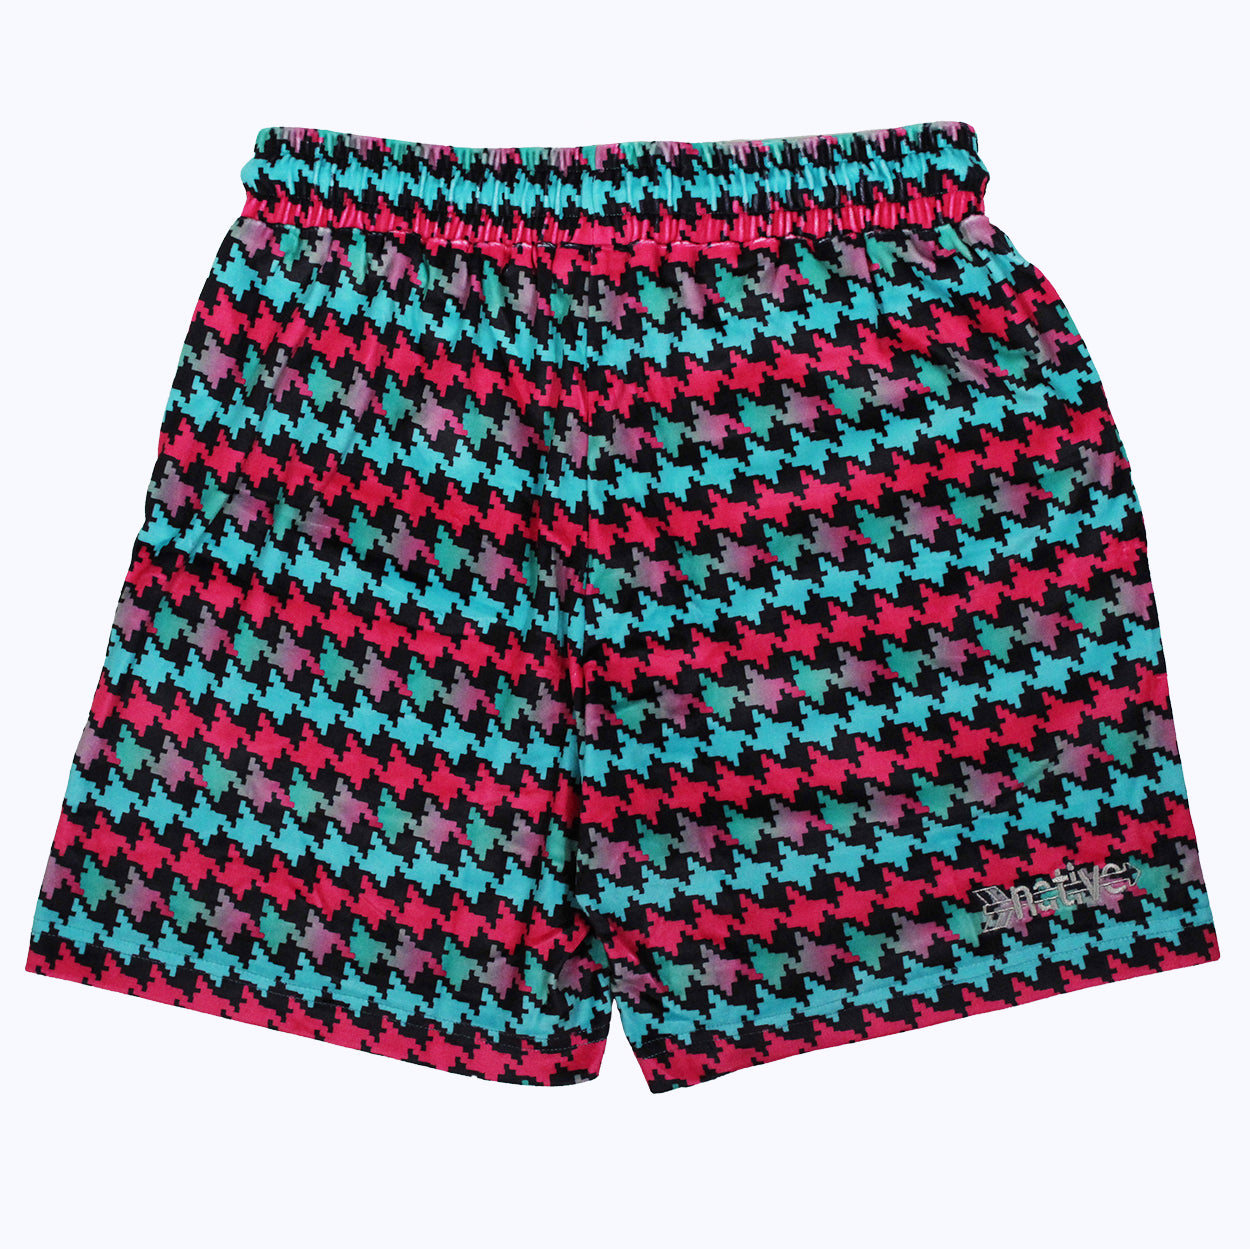 houndstooth velour shorts in south beach (black)